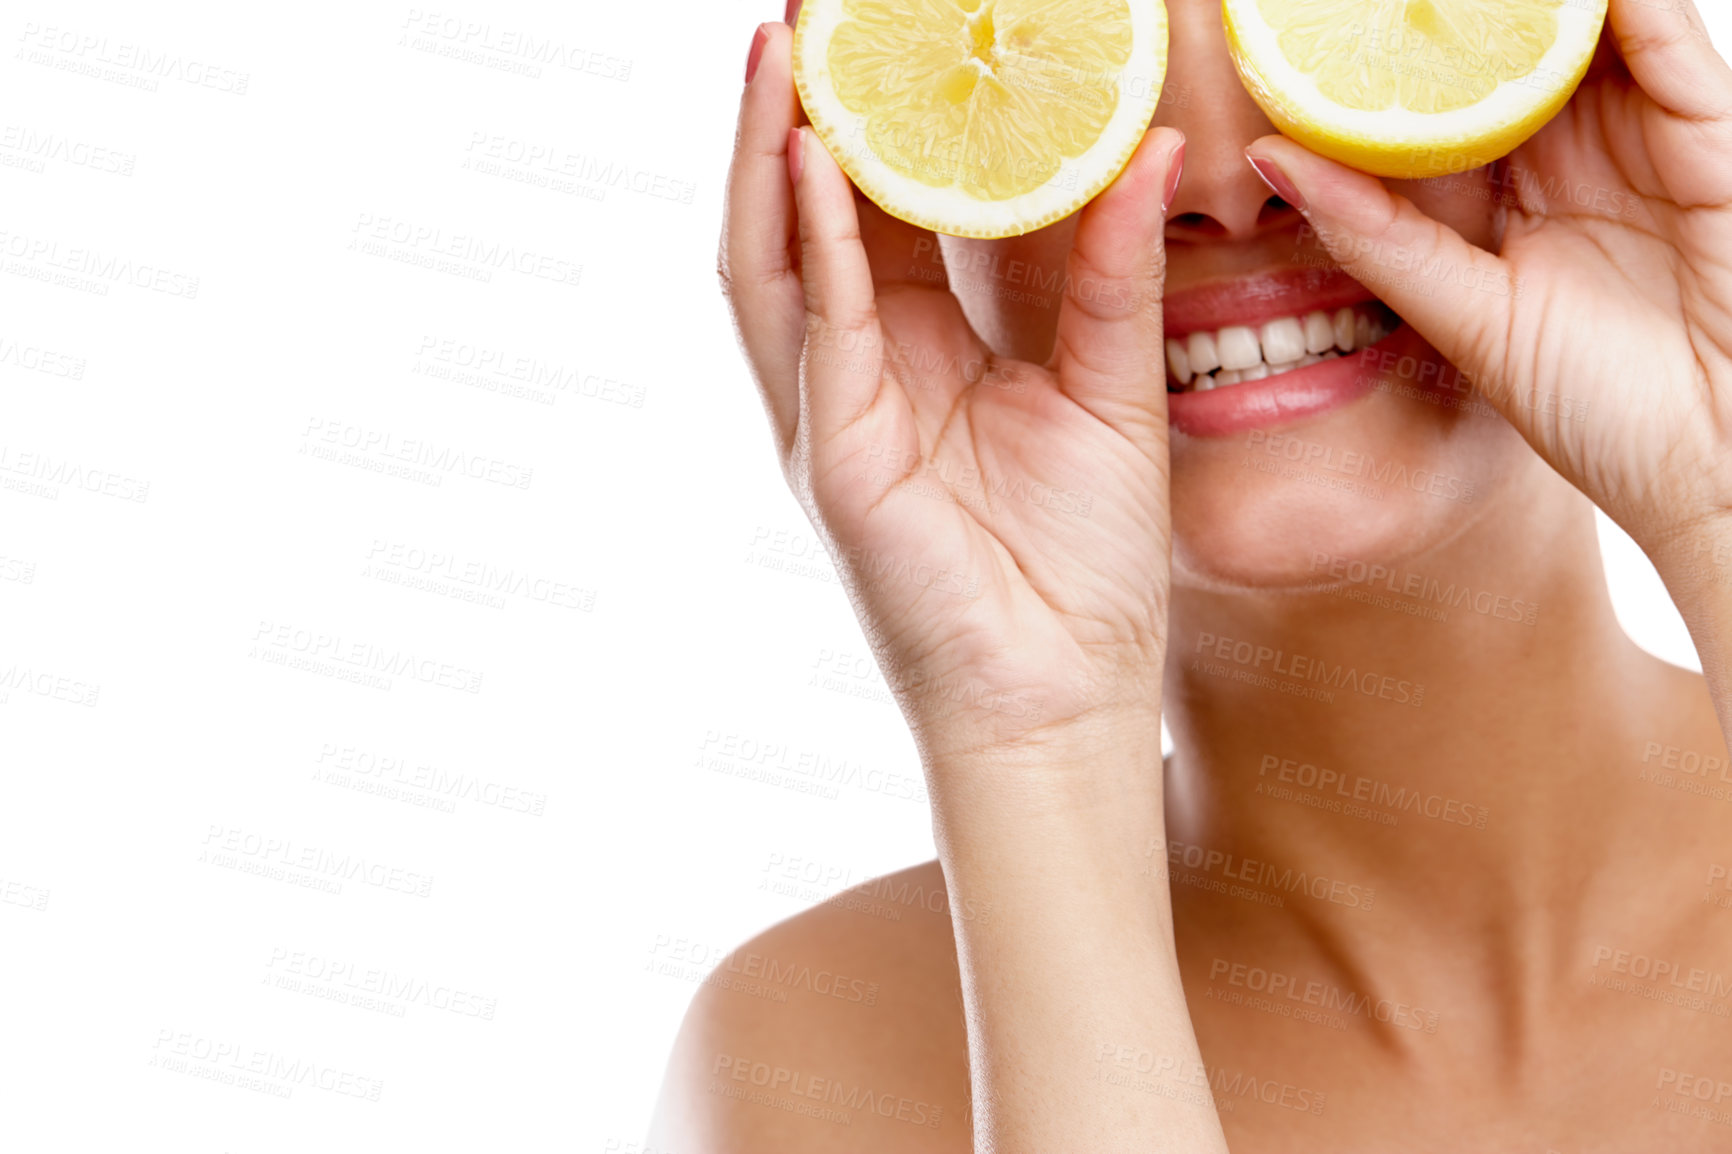 Buy stock photo Studio shot of a young woman holding two halves of a lemon in front of her eyes